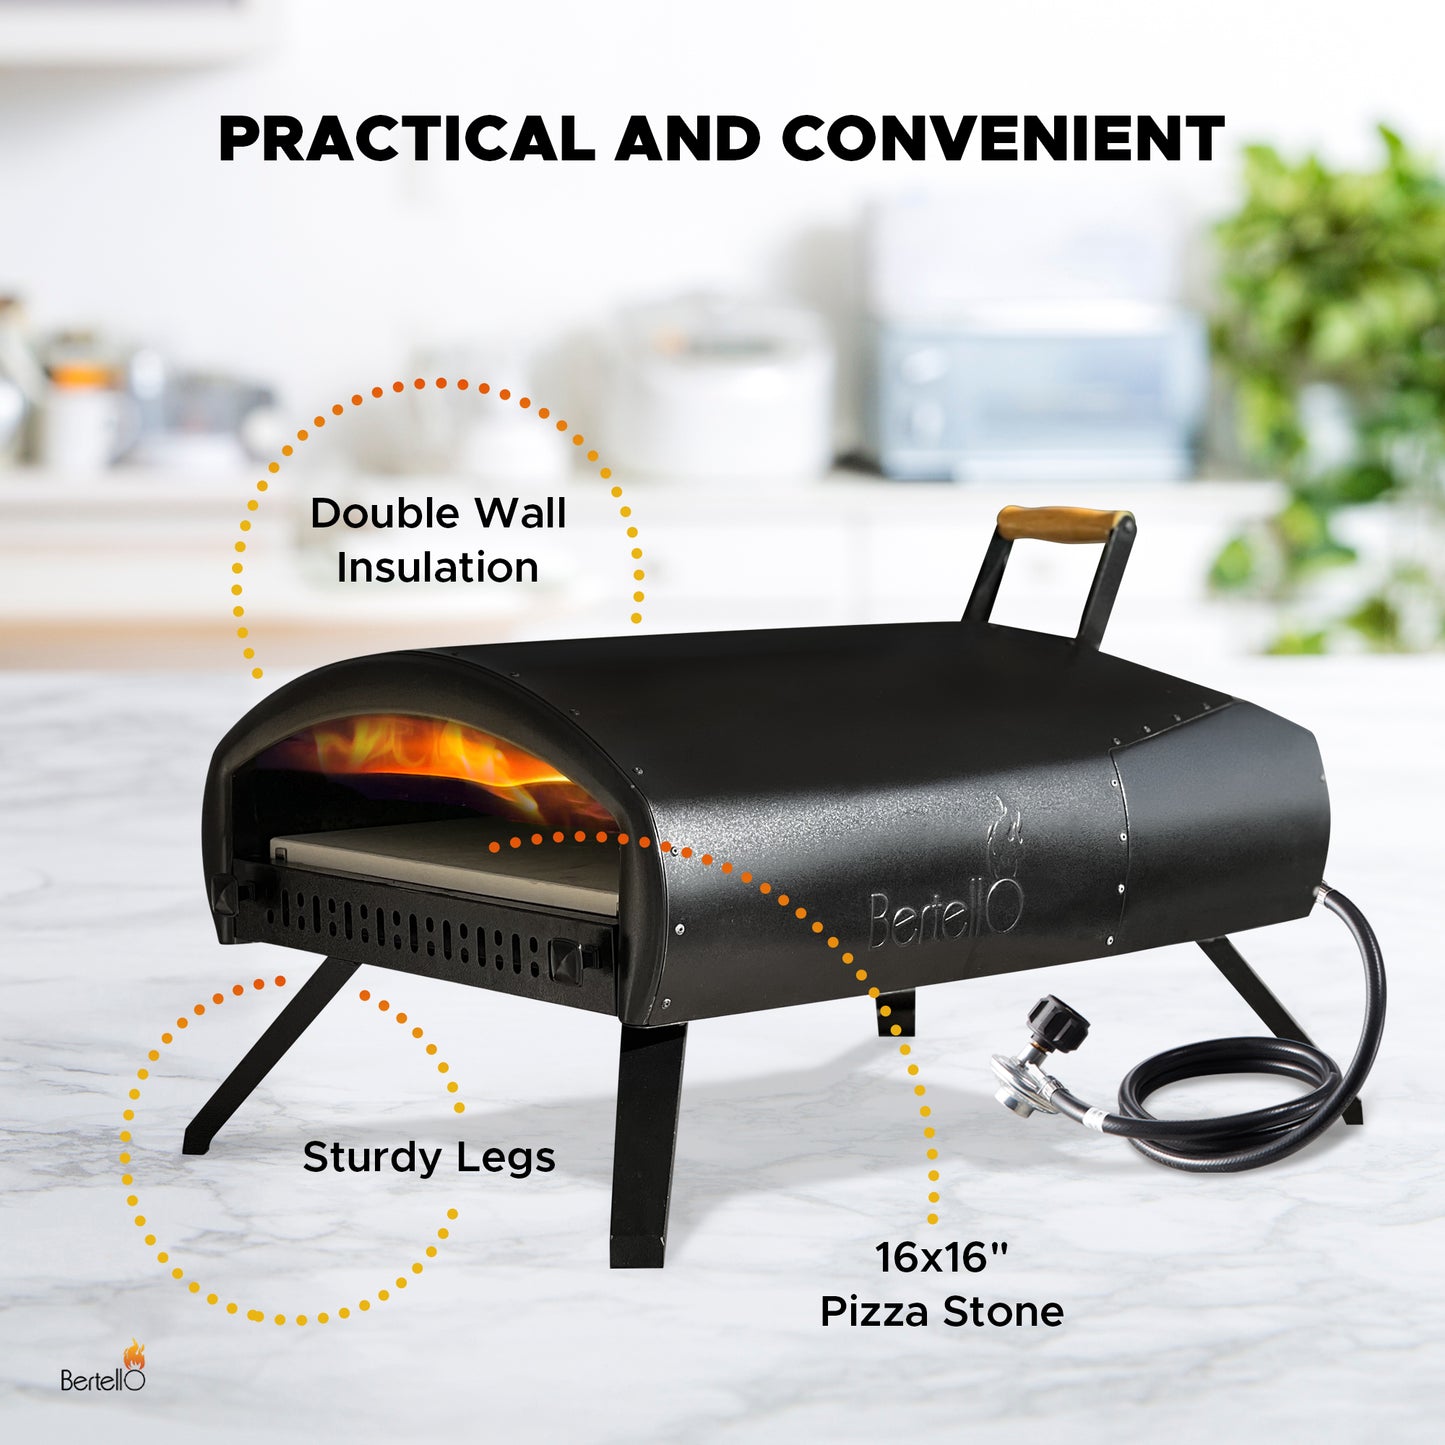 Bertello Grande 16" Outdoor Pizza Oven - Gas & Wood Fired Simultaneously - Outdoor Pizza Oven AS SEEN ON SHARK TANK - PATENTED